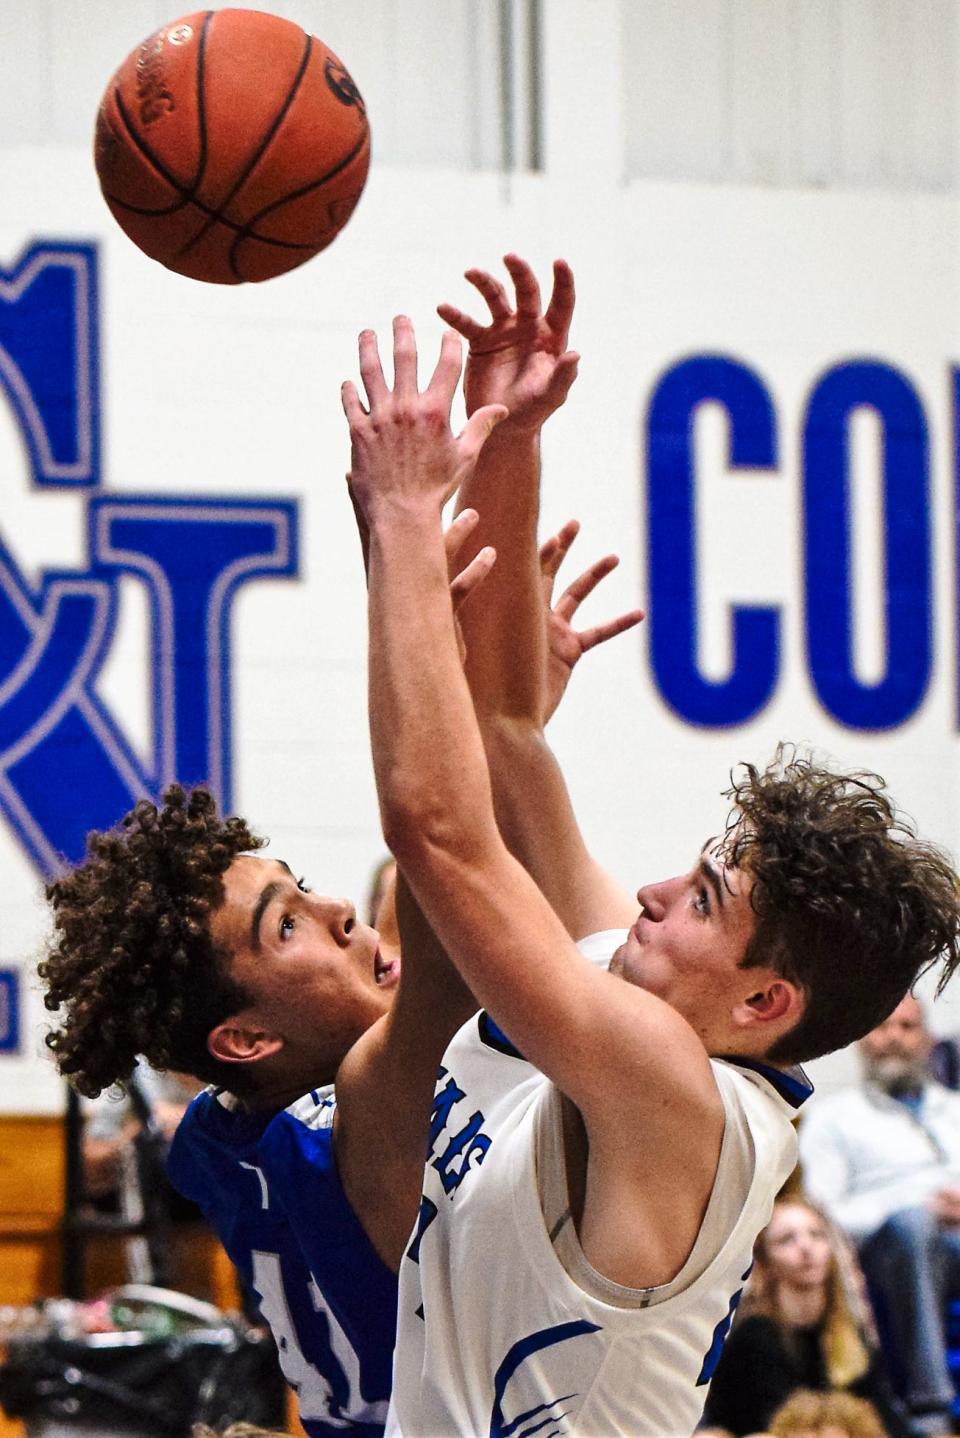 Lucas Frohwein had 21 points and eight rebounds for the Colo-NESCO boys basketball team in a 48-41 loss to Don Bosco Jan. 3 in Colo.